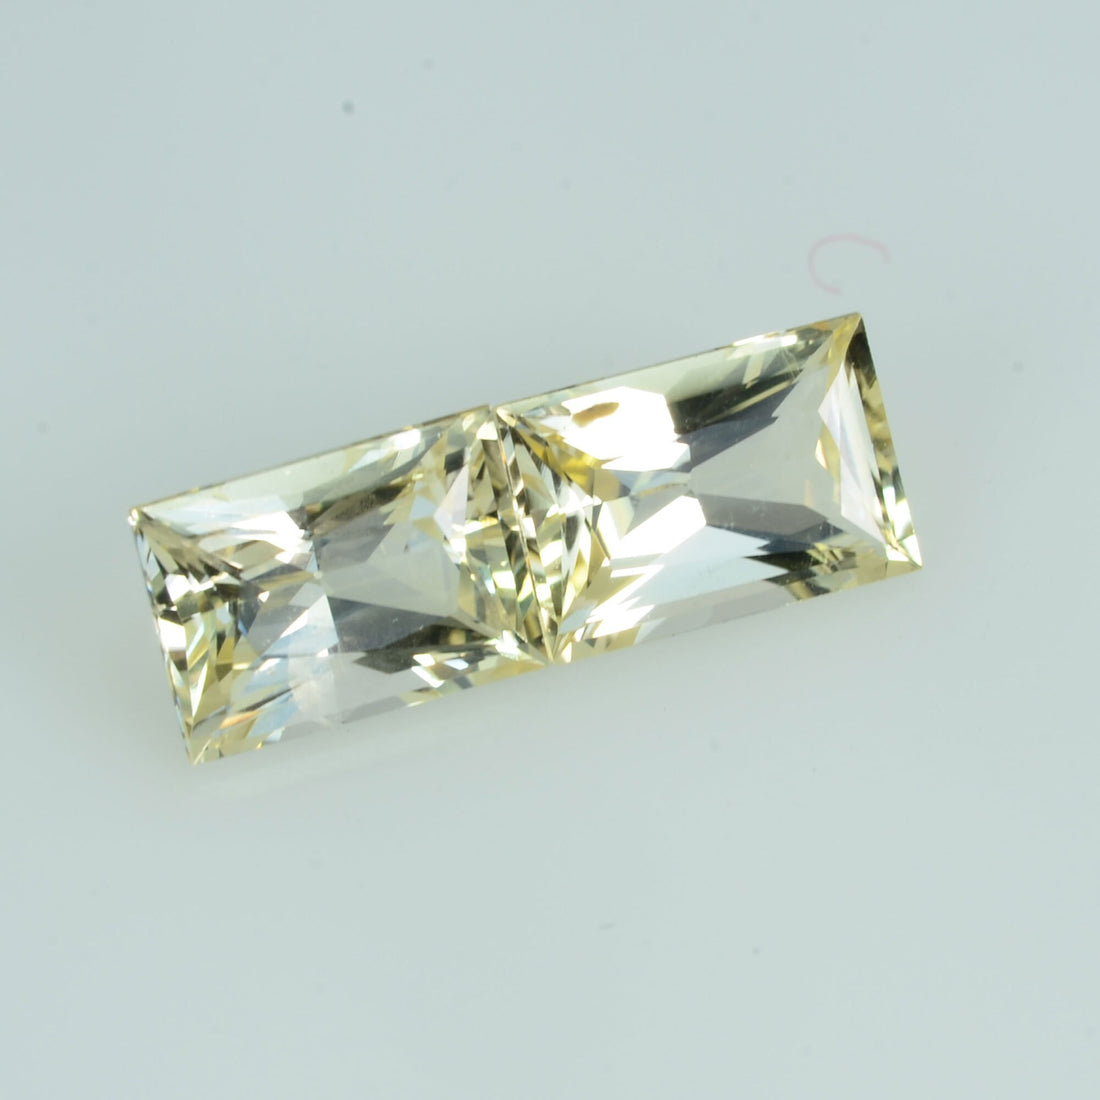 1.47 cts Natural Yellow Sapphire Loose Pair Gemstone Baguette Cut